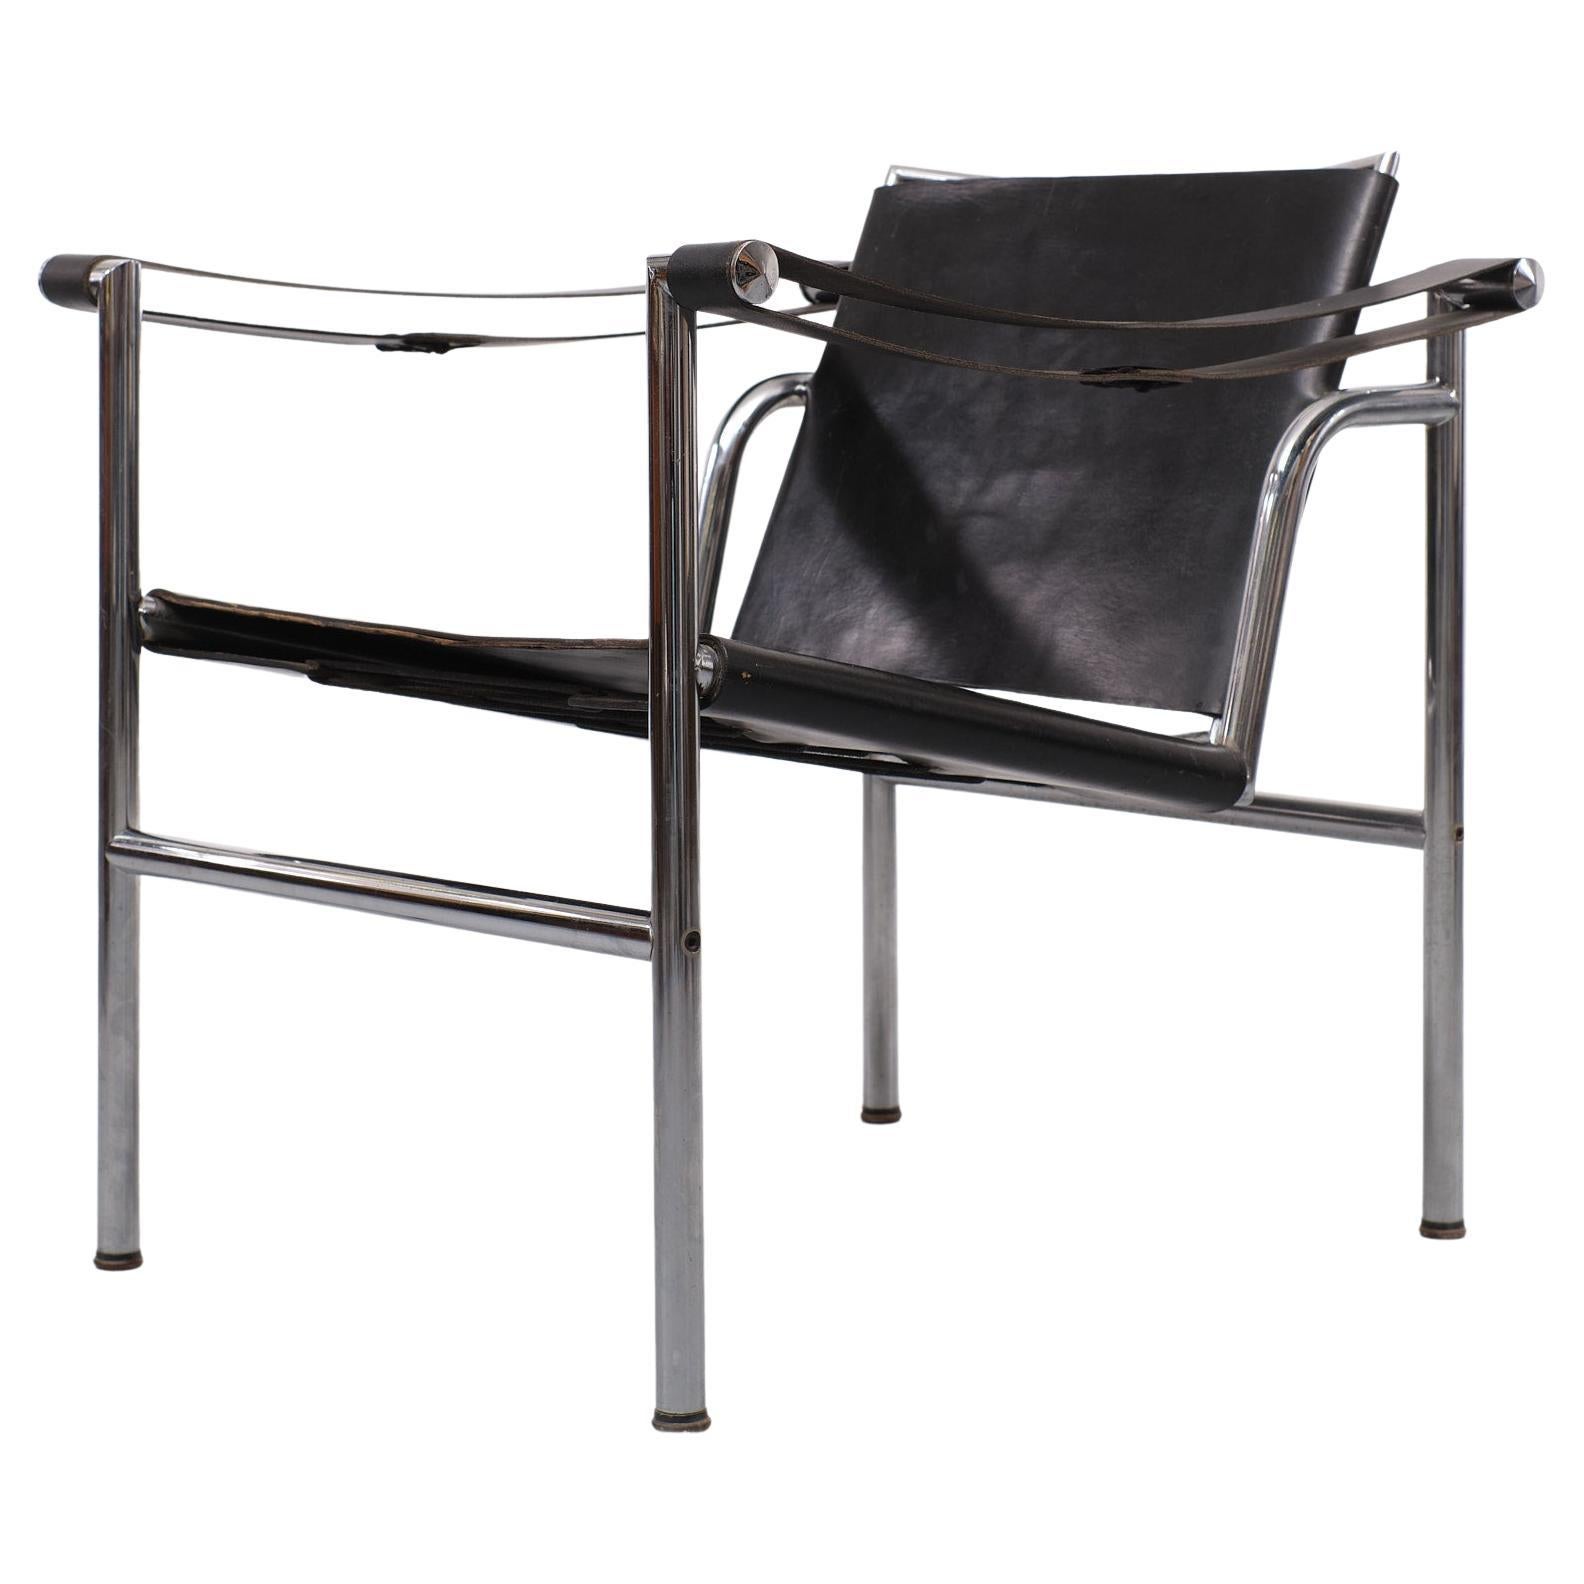 Very nice black leather arm chair. The backrest is moveable. Thick leather 
upholstery. Chrome base. Looks almost the same LC1 chair by Le Corbusier.
Some small differents. This is good quality chair.